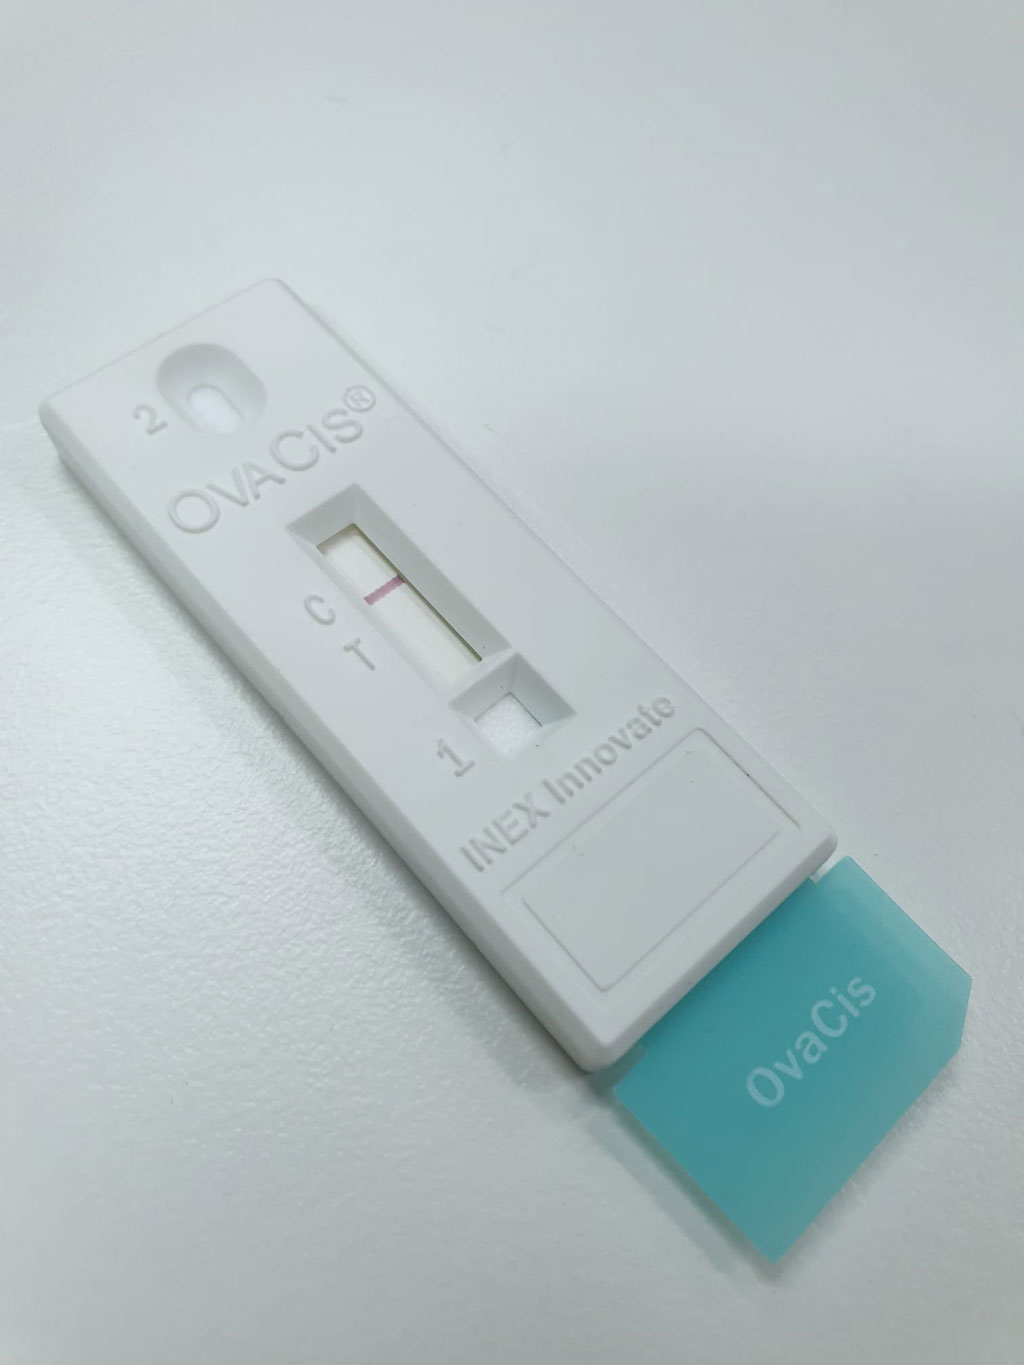 Image: OvaCis rapid test is slated to launch in EU and Southeast Asia by 2022 end (Photo courtesy of INEX Innovate)